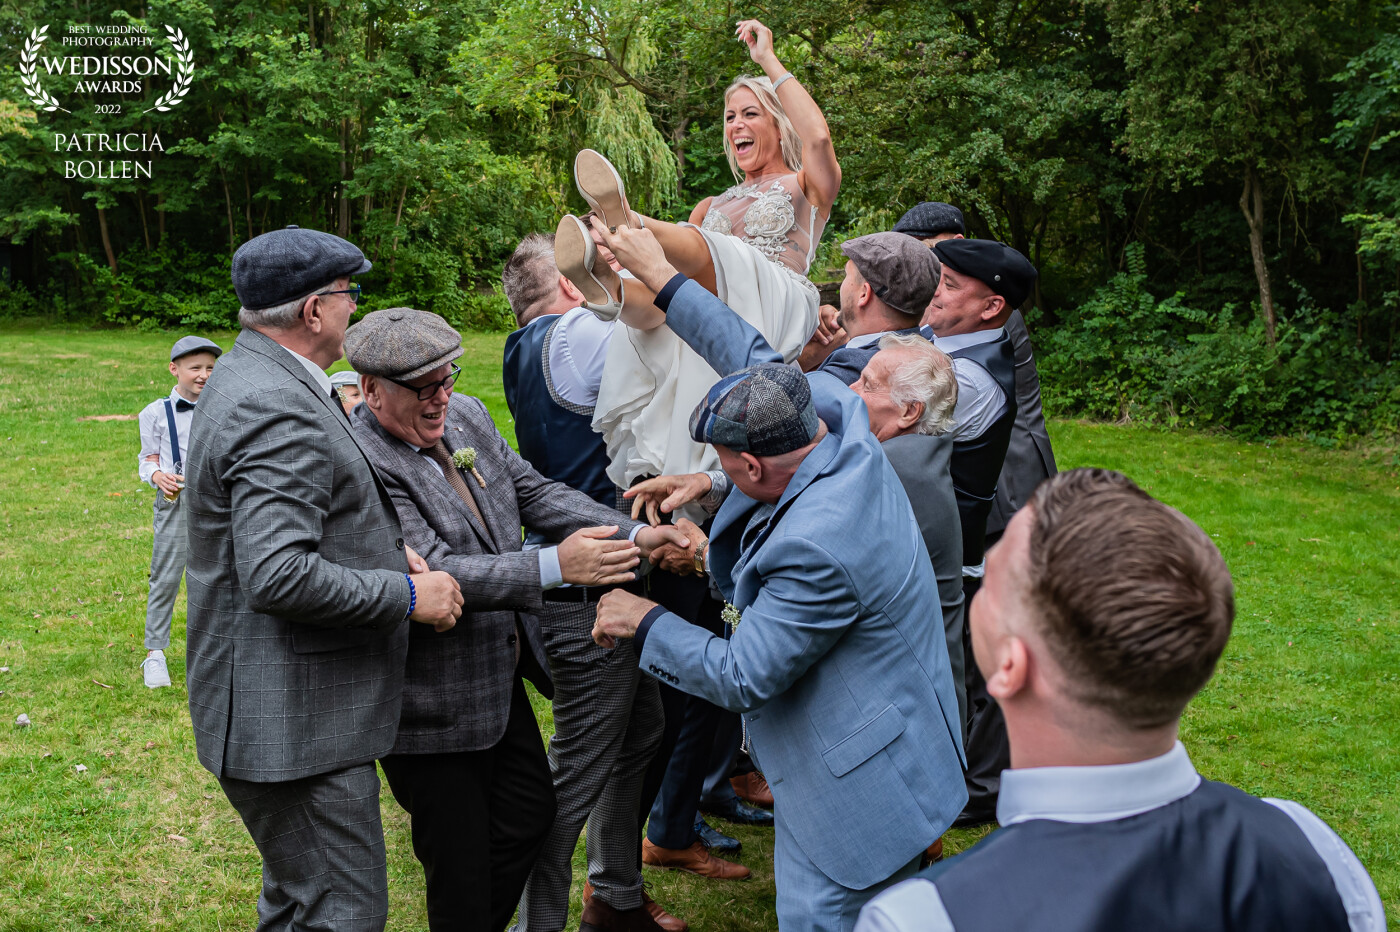 This beautiful bride is juggled into the air. The friends are dressed in Peaky Blinders style. Everyone had a lot of fun whole day and i was happy to capture it.